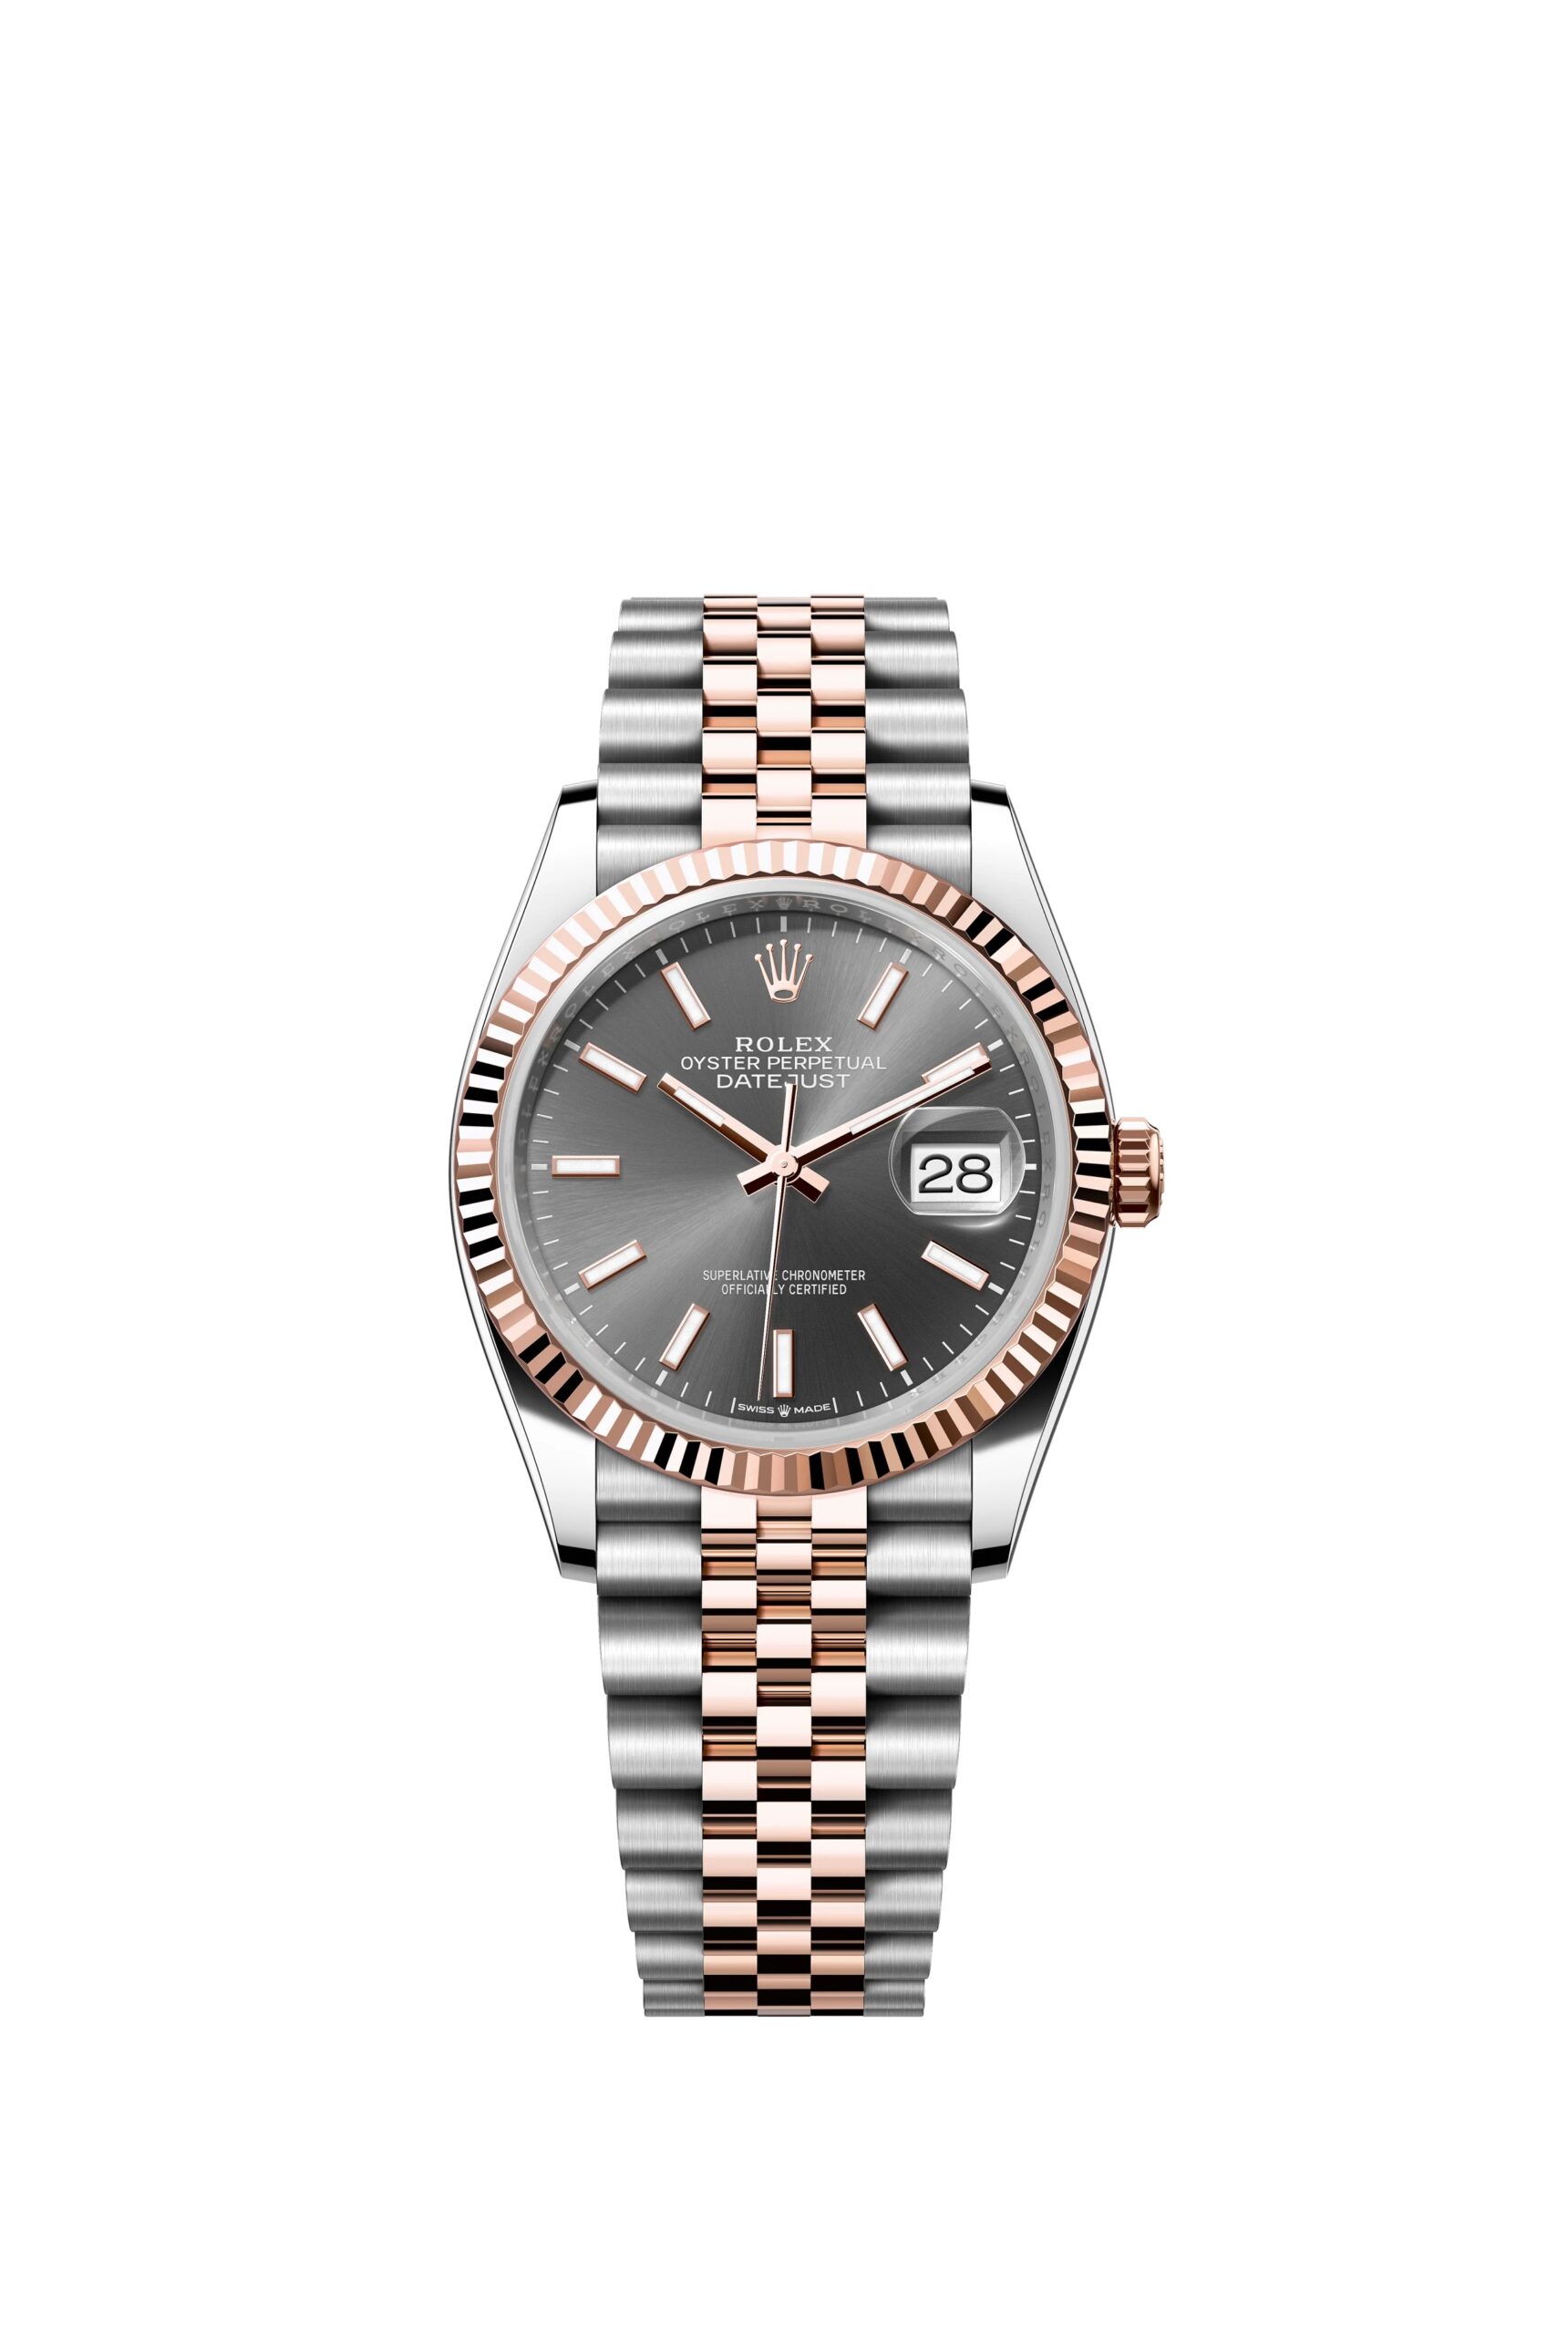 Rolex Datejust 36 Oyster, 36 mm, Oystersteel and Everose gold Reference 126231